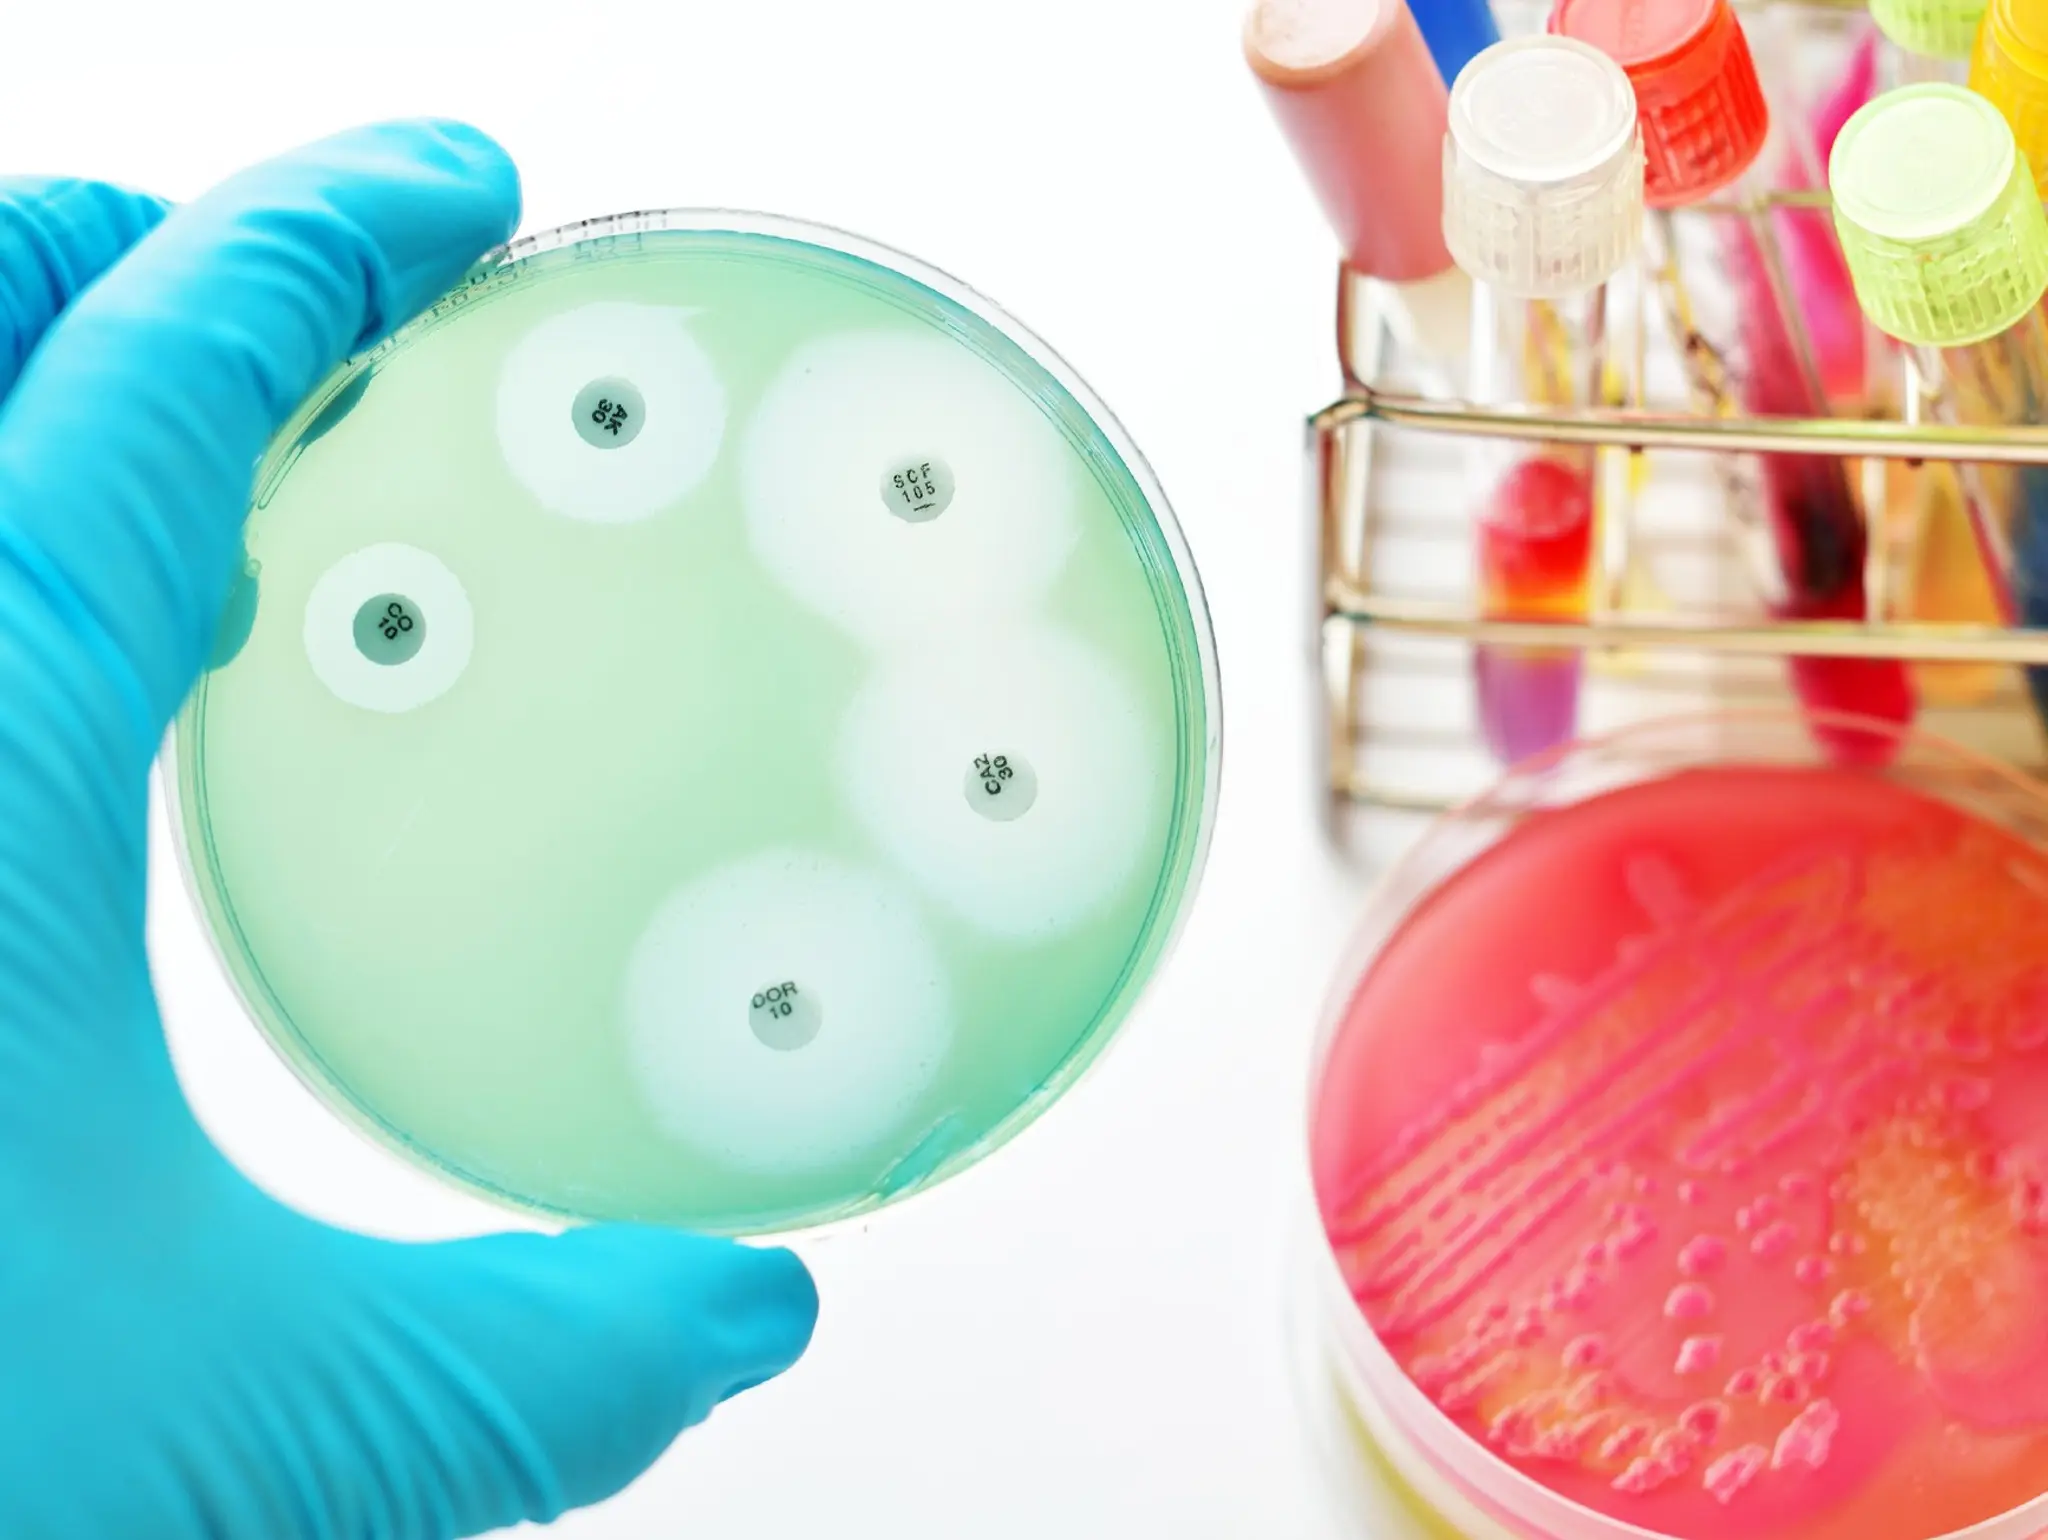 Five facts about antimicrobial resistance